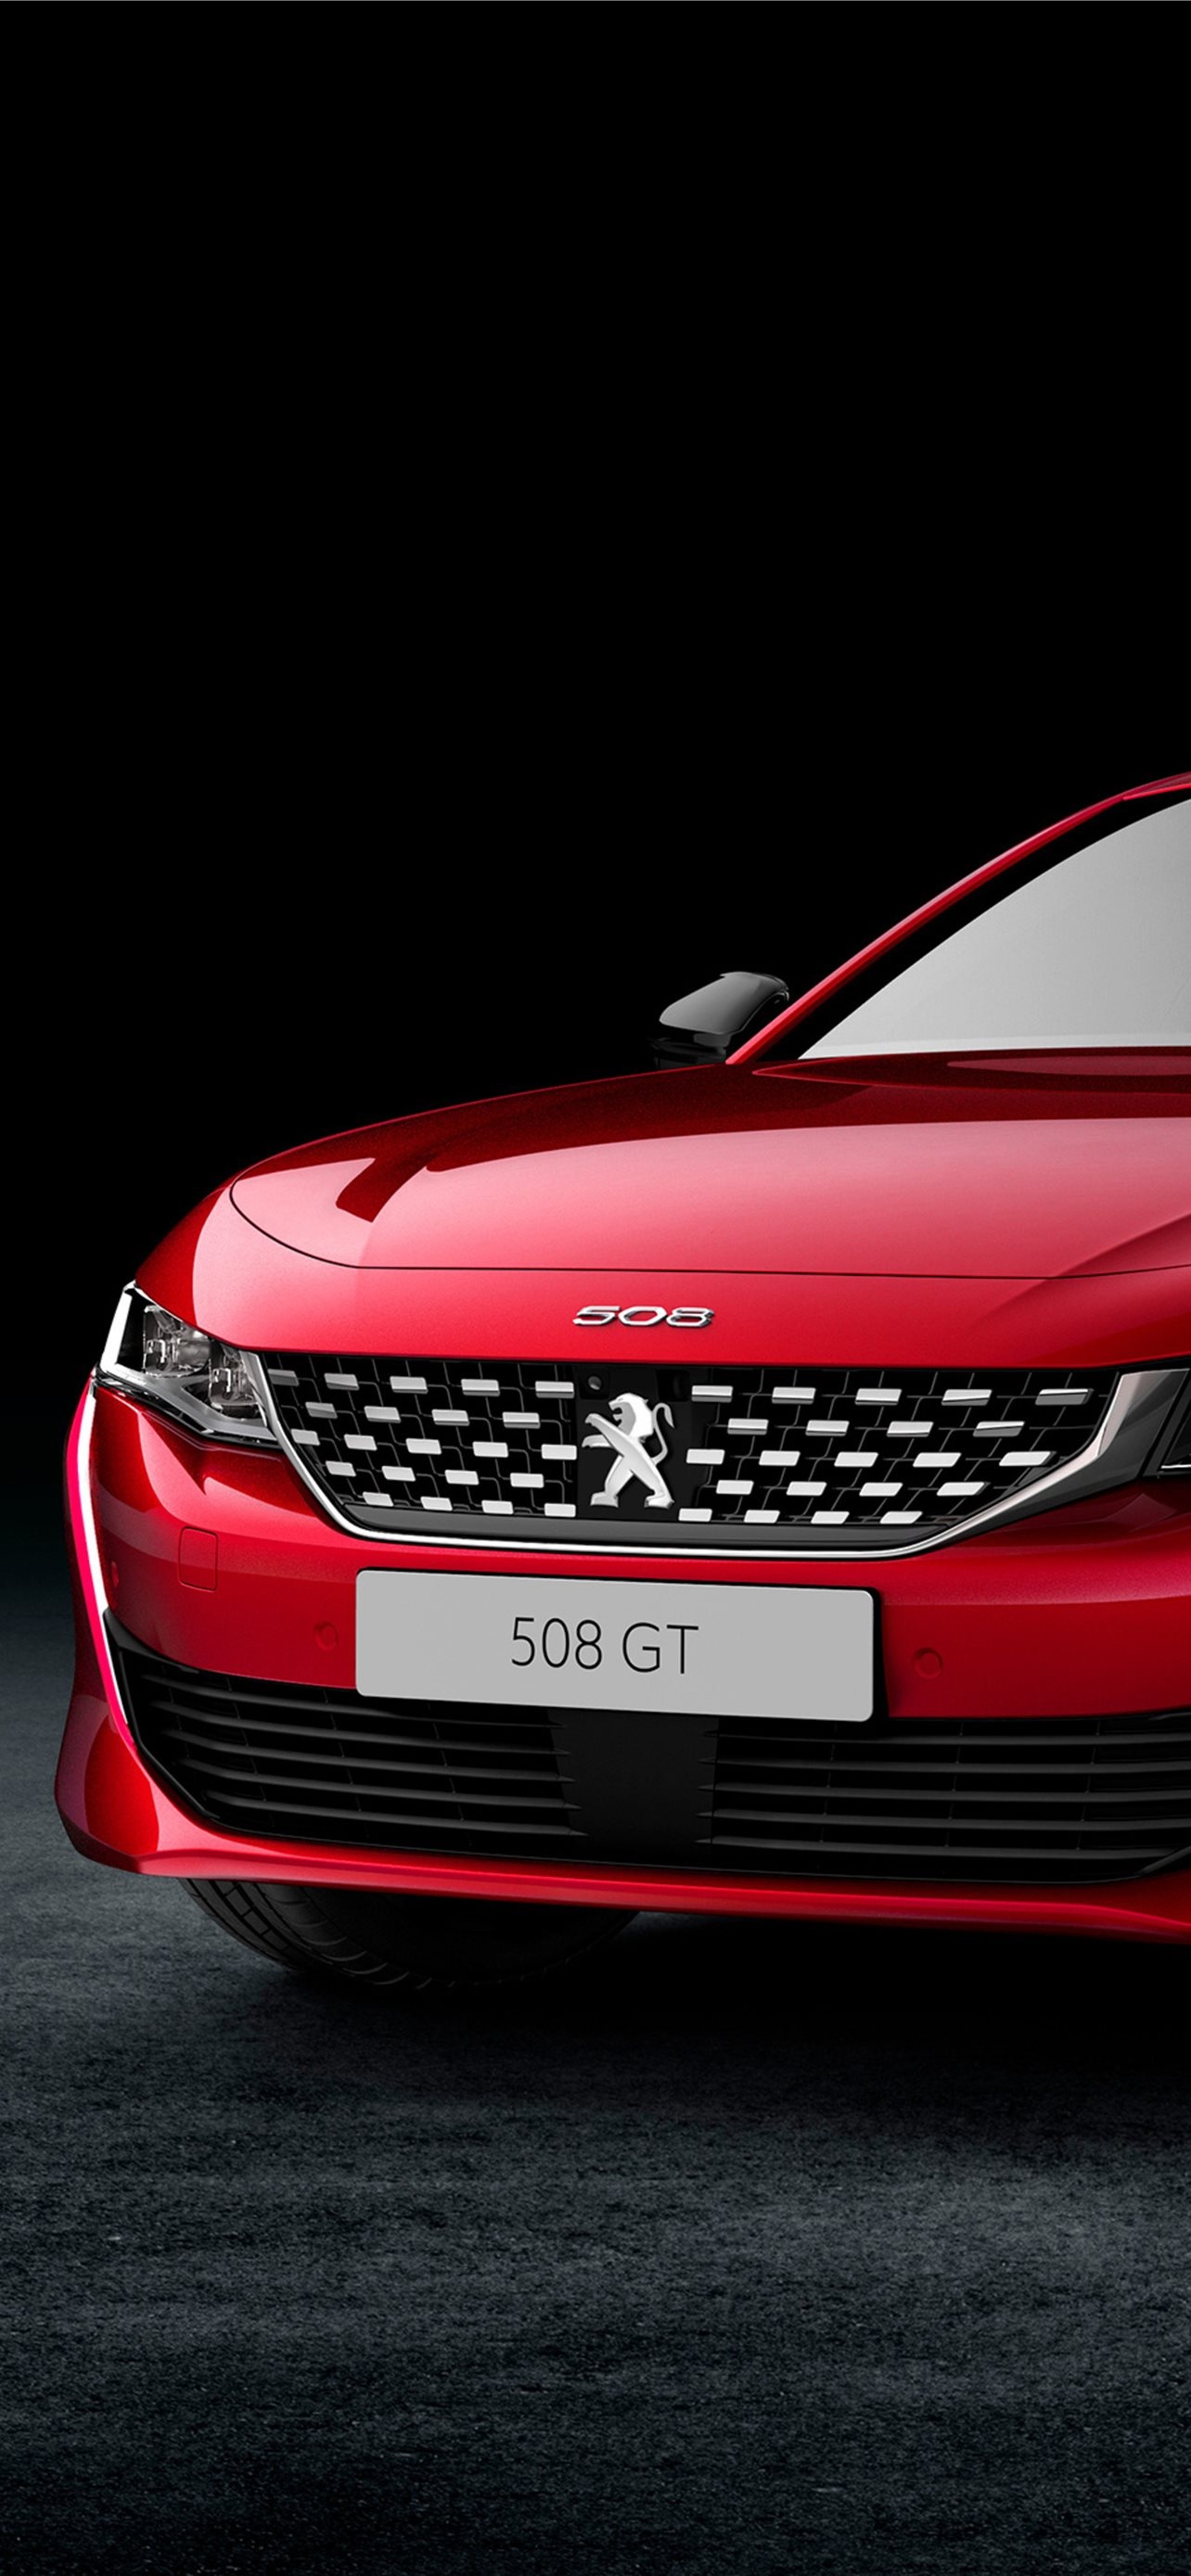 Peugeot 508, iPhone wallpapers, Free download, 1290x2780 HD Phone